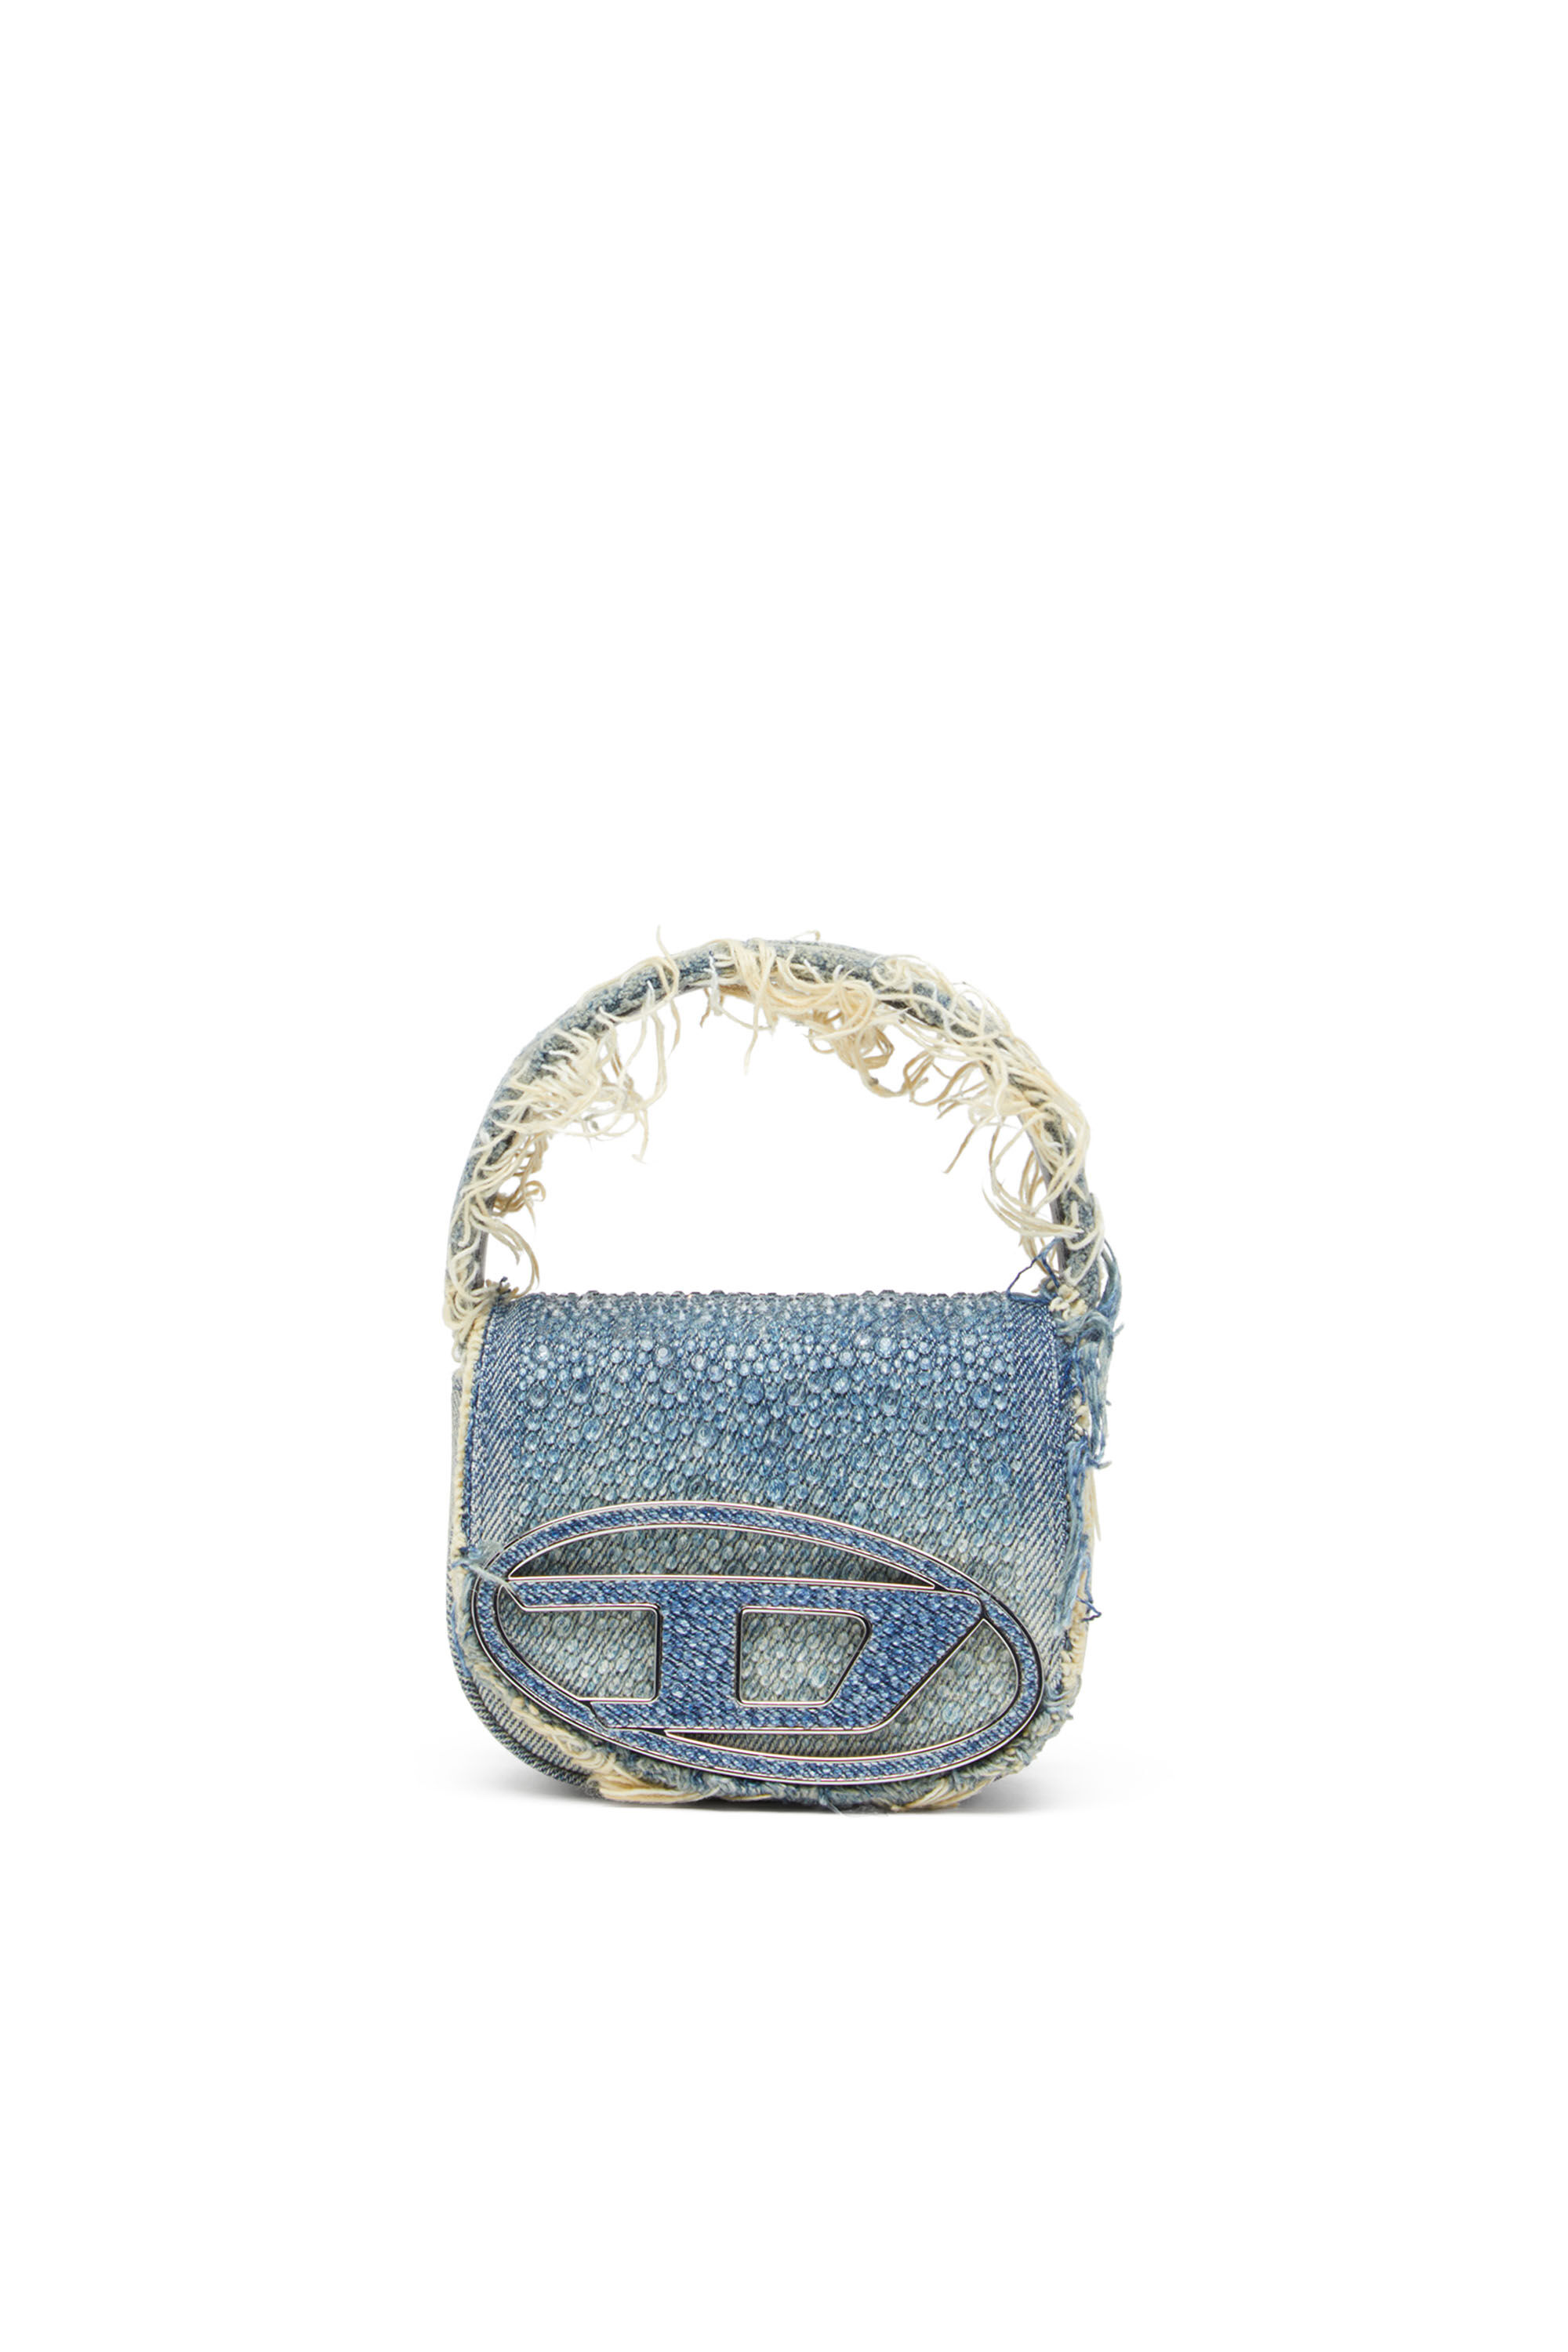 Diesel - 1DR XS, Woman 1DR XS-Iconic mini bag in denim and crystals in Blue - Image 1